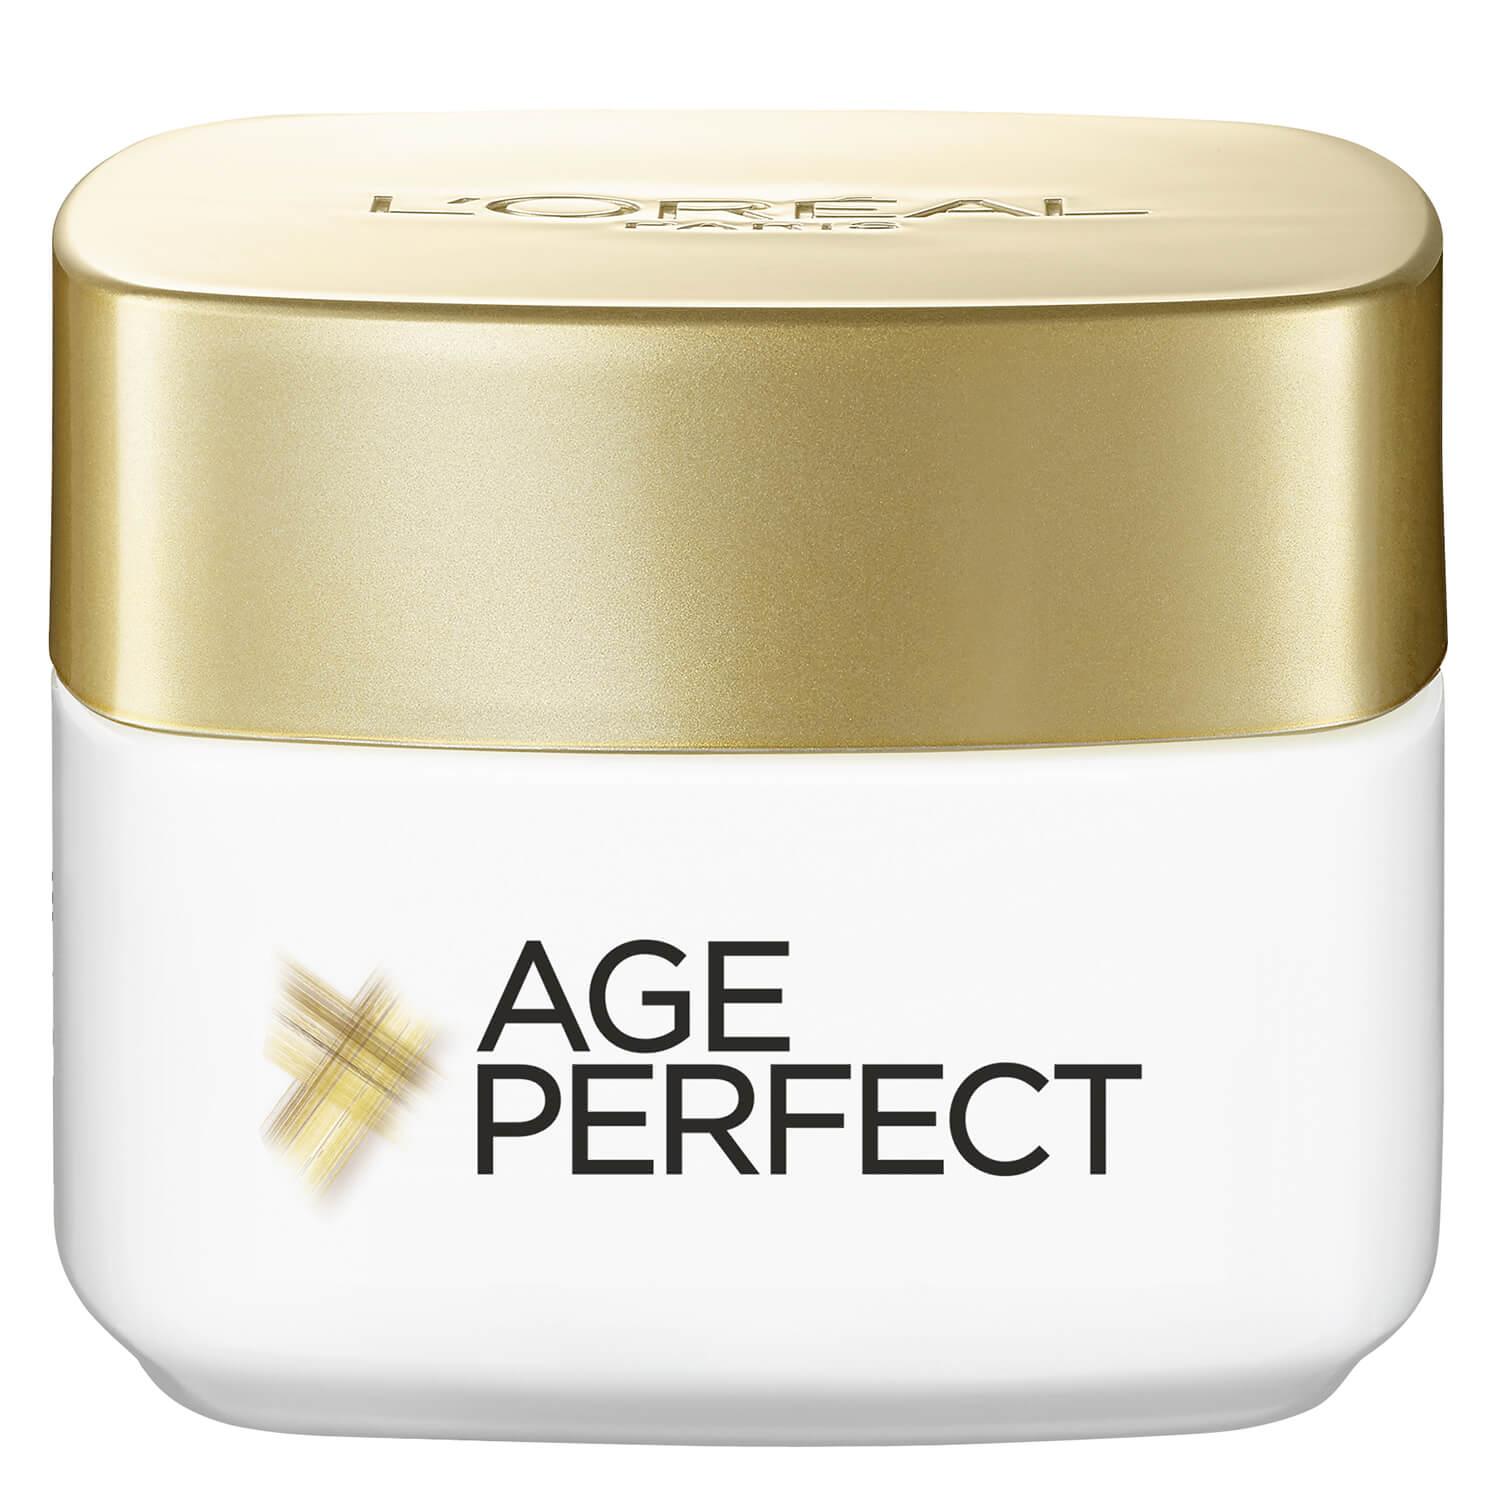 LOréal Skin Expert - Age Perfect Pro-Collagen Expert Firming Day Care